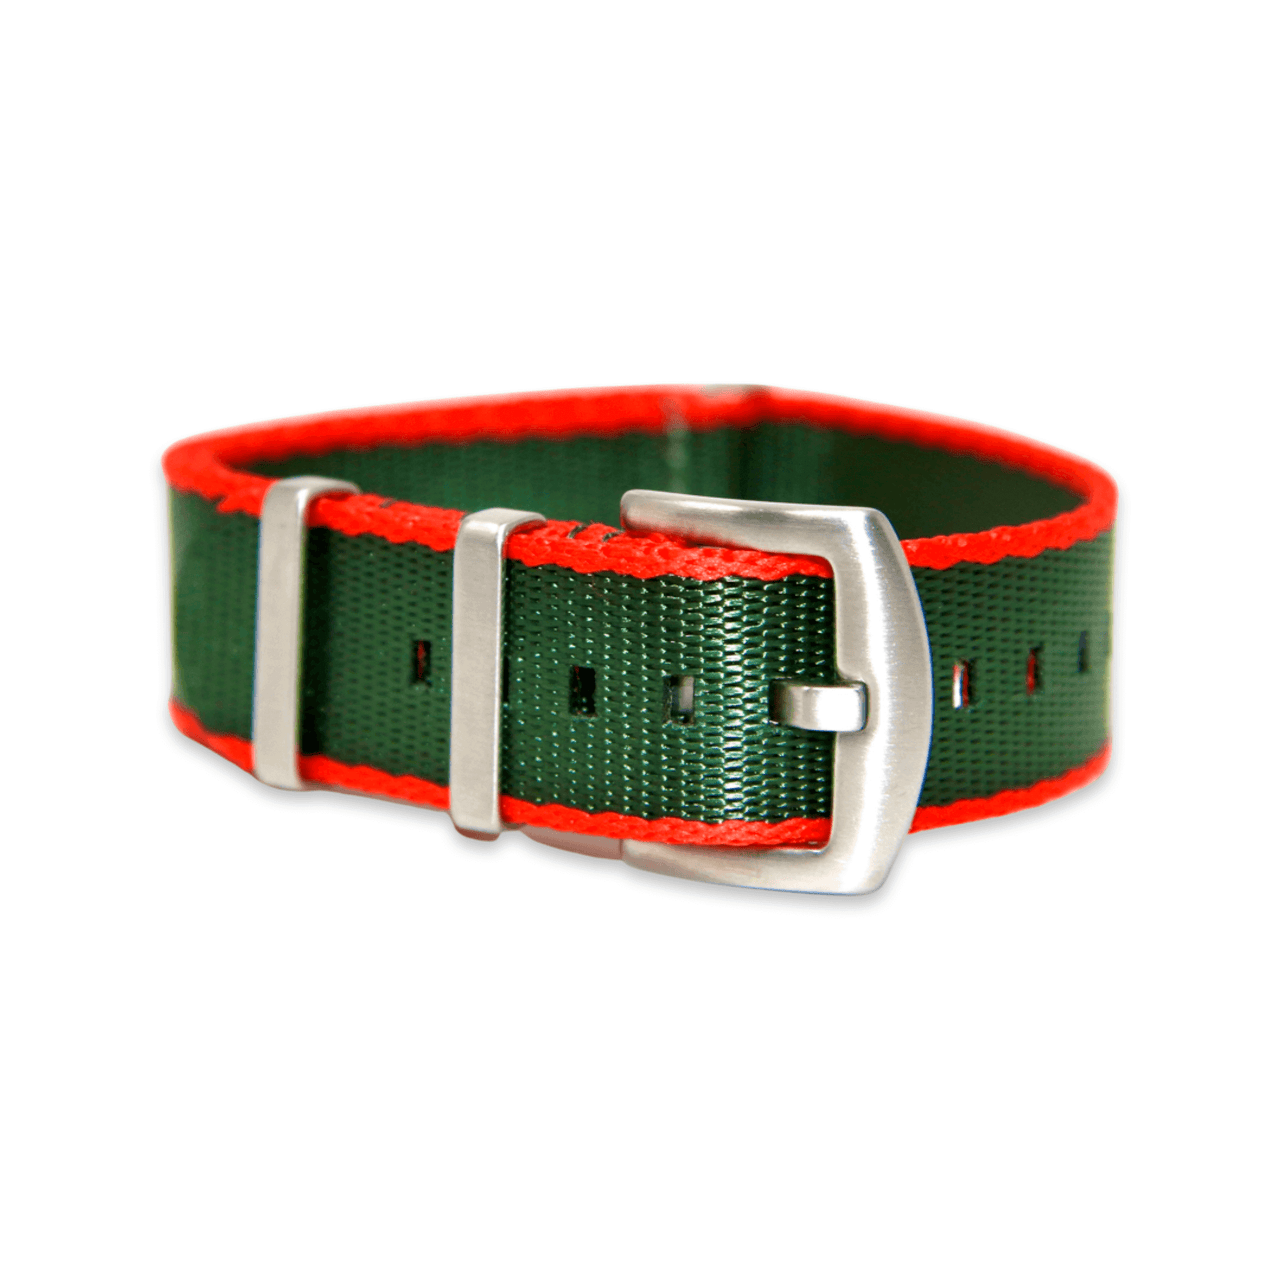 Premium Thick Woven Military Style Watch Strap - Red and Emerald Green